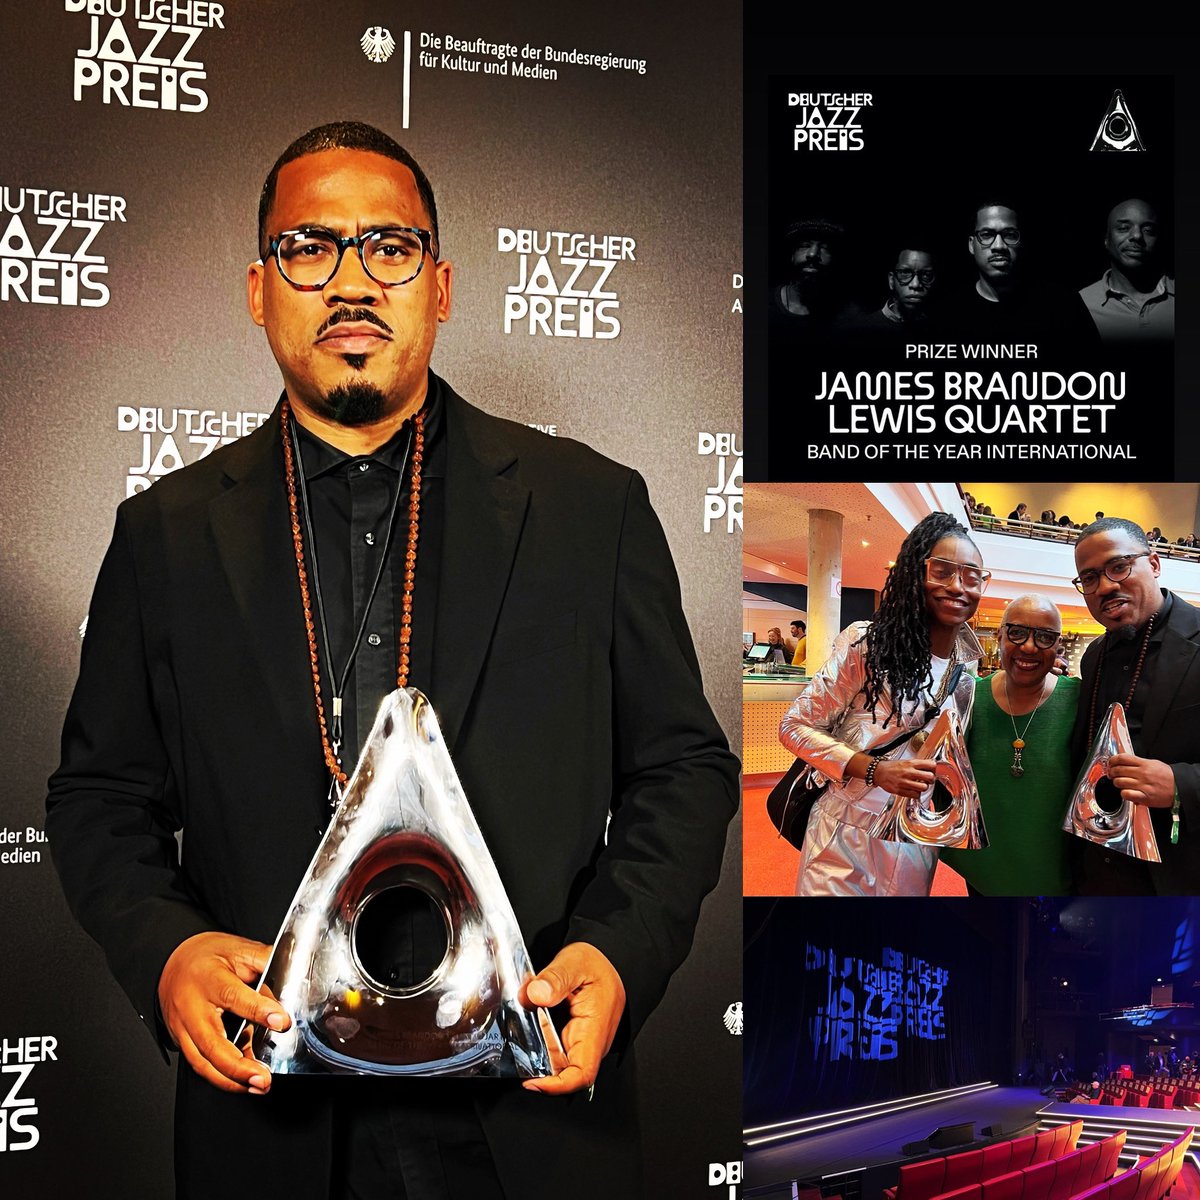 Count down toward the end of the year … Highlights of 2023 !!! - winning Deutscher Jazz Preis.. Band of the Year . 
Shout to Brad Jones, Aruan Ortiz, Chad Taylor .. also pictured The amazing Ms Gail and the amazing  @LakeciaB @jazzpreis #rt #nowplaying #mysic